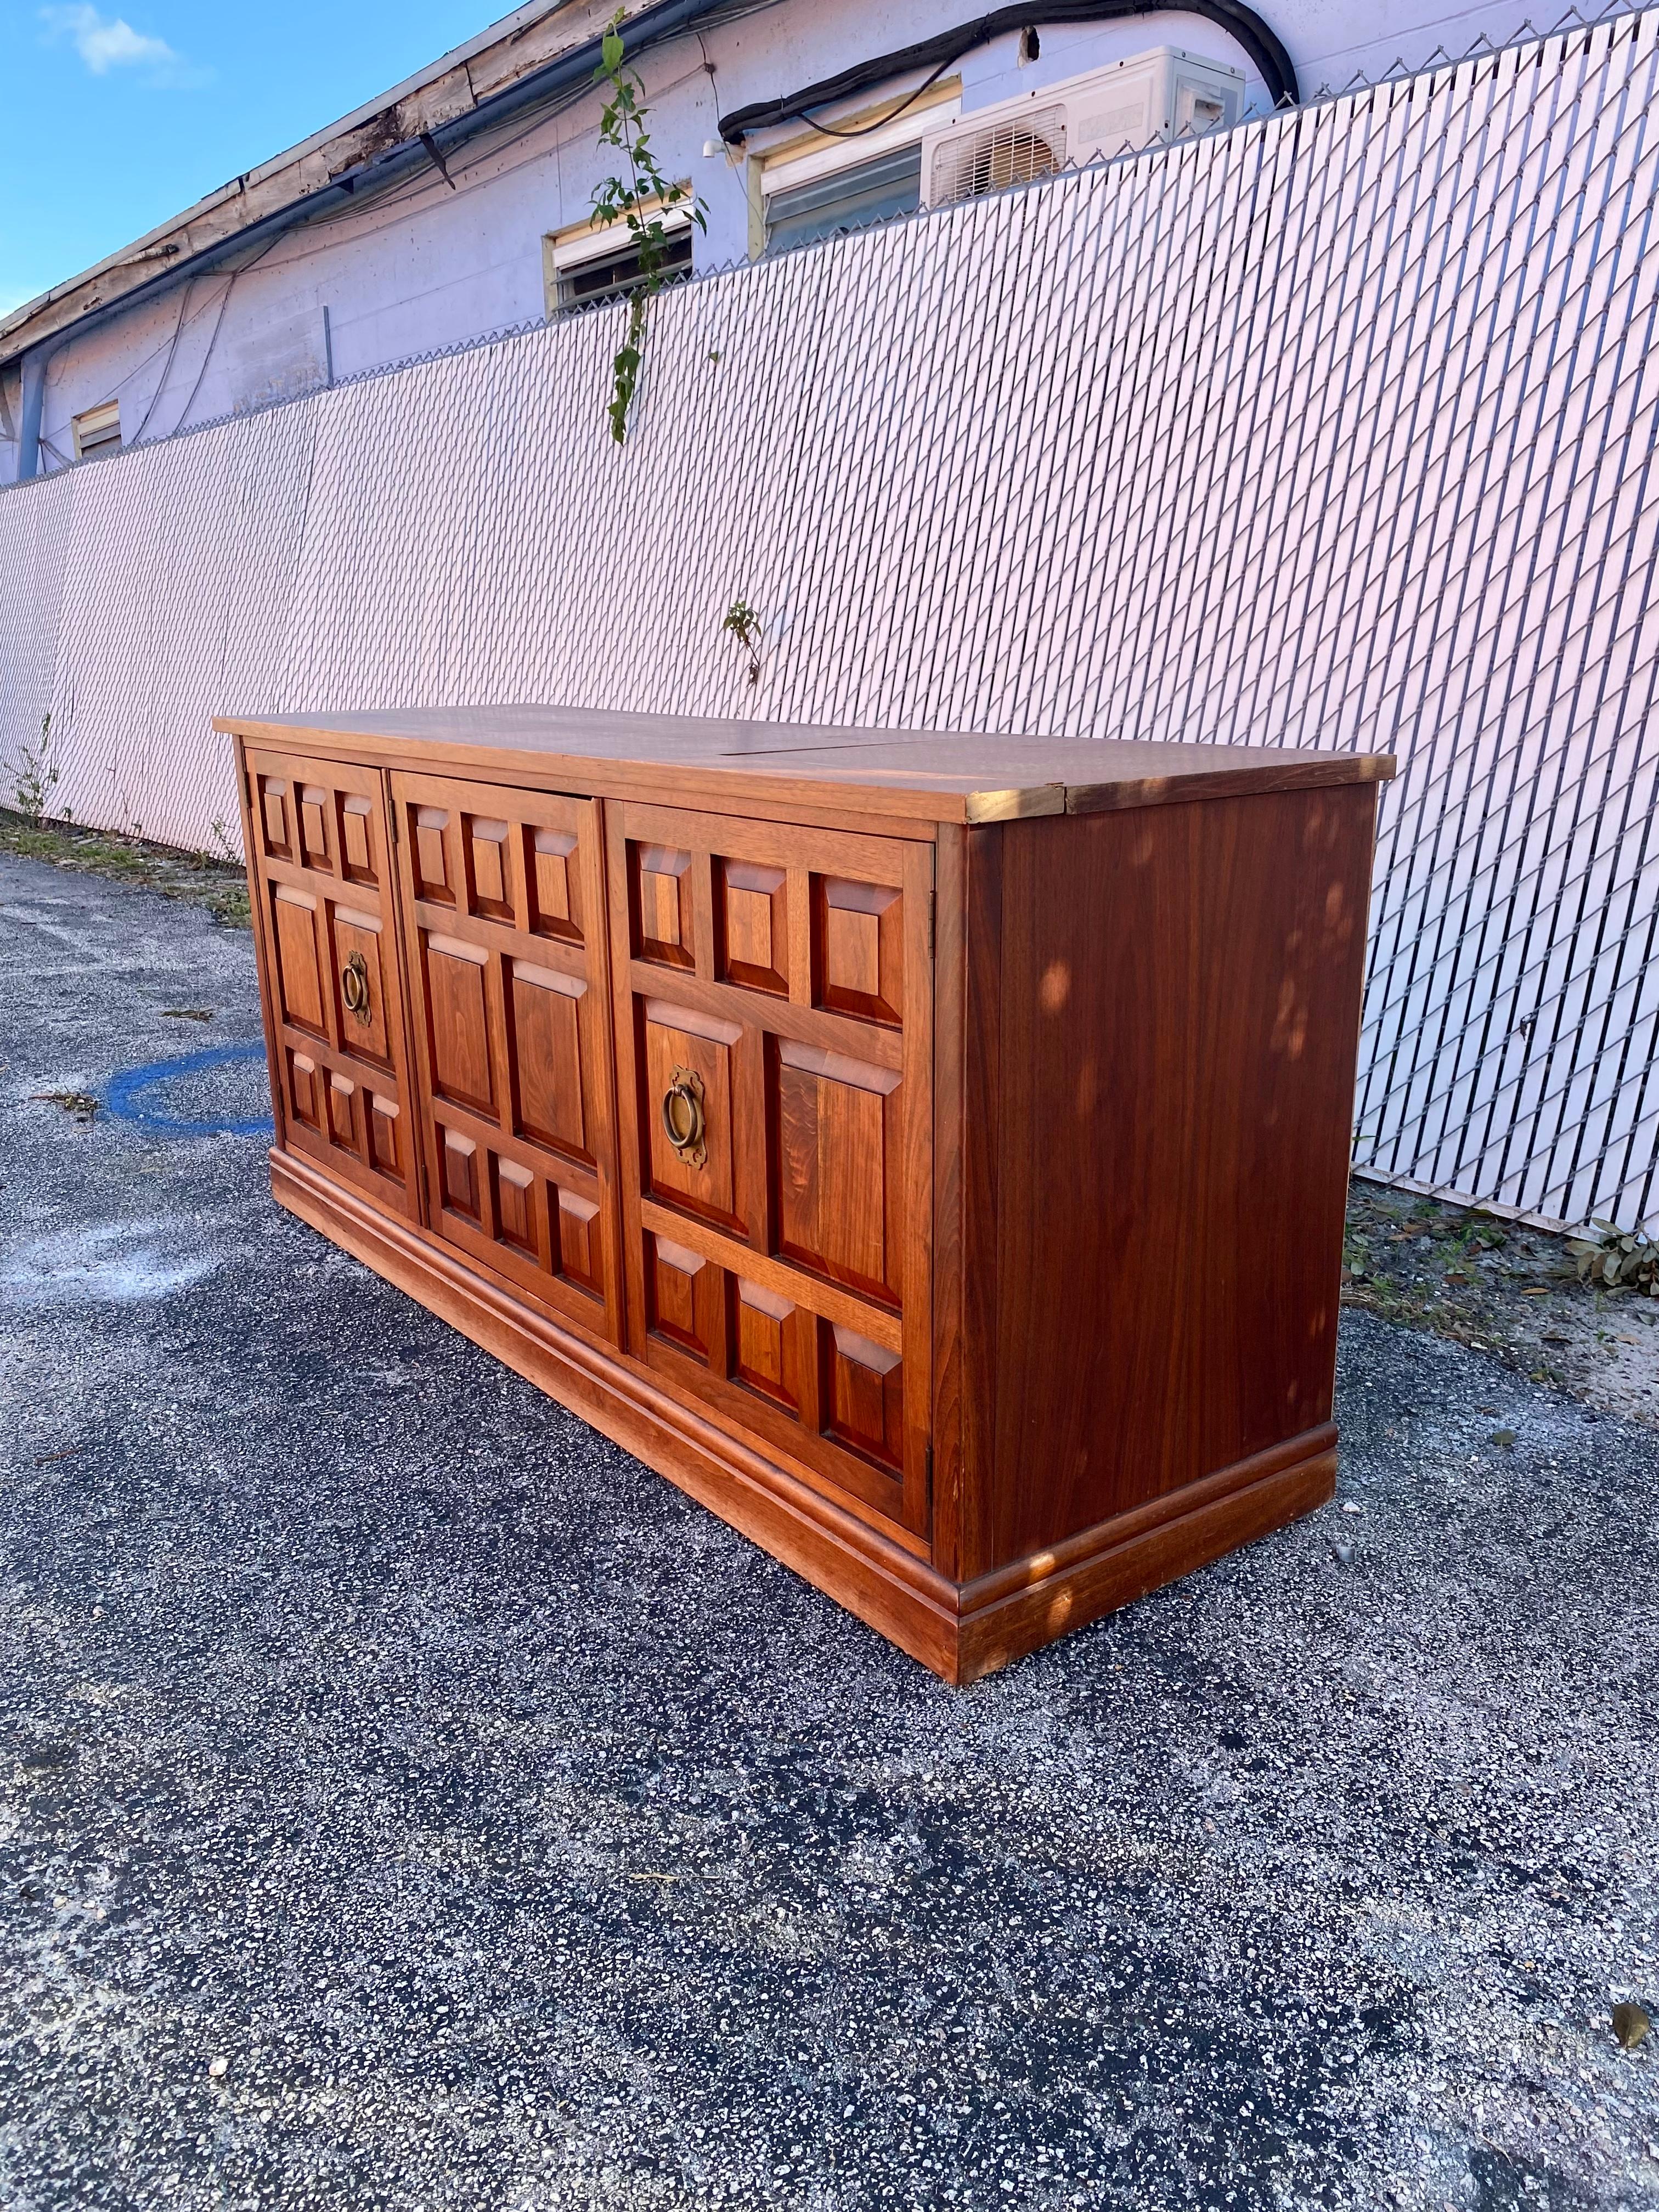 1960s Widdicomb Spanish Baroque Style Wood SideBoard Storage Cabinet In Good Condition For Sale In Fort Lauderdale, FL